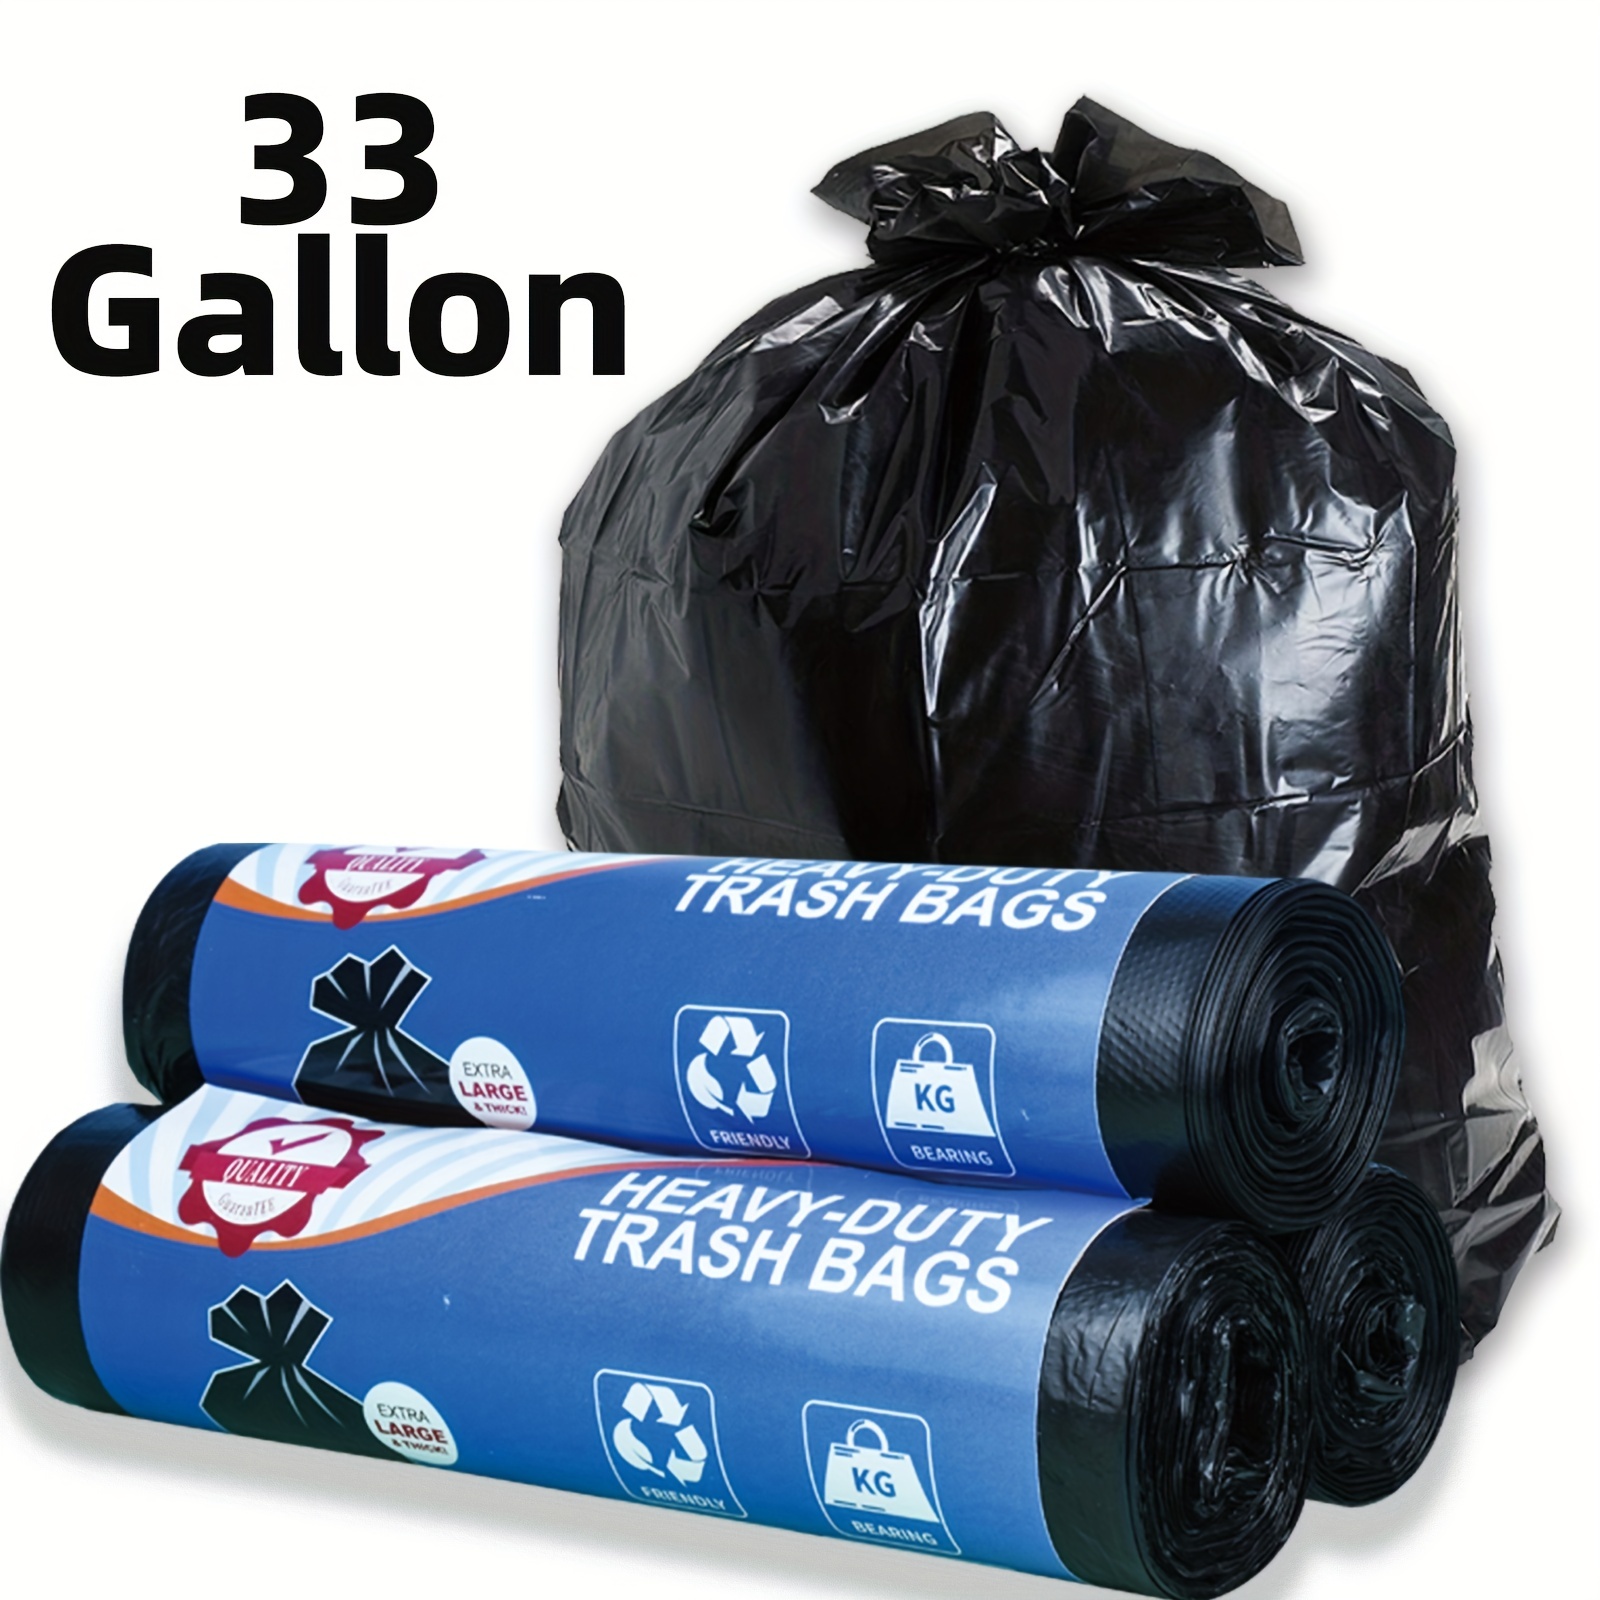 90 Gallon Trash Bags Super Big Mouth Bags X-Large Industrial Commercial XL  Garbage Can Liners Extra Large